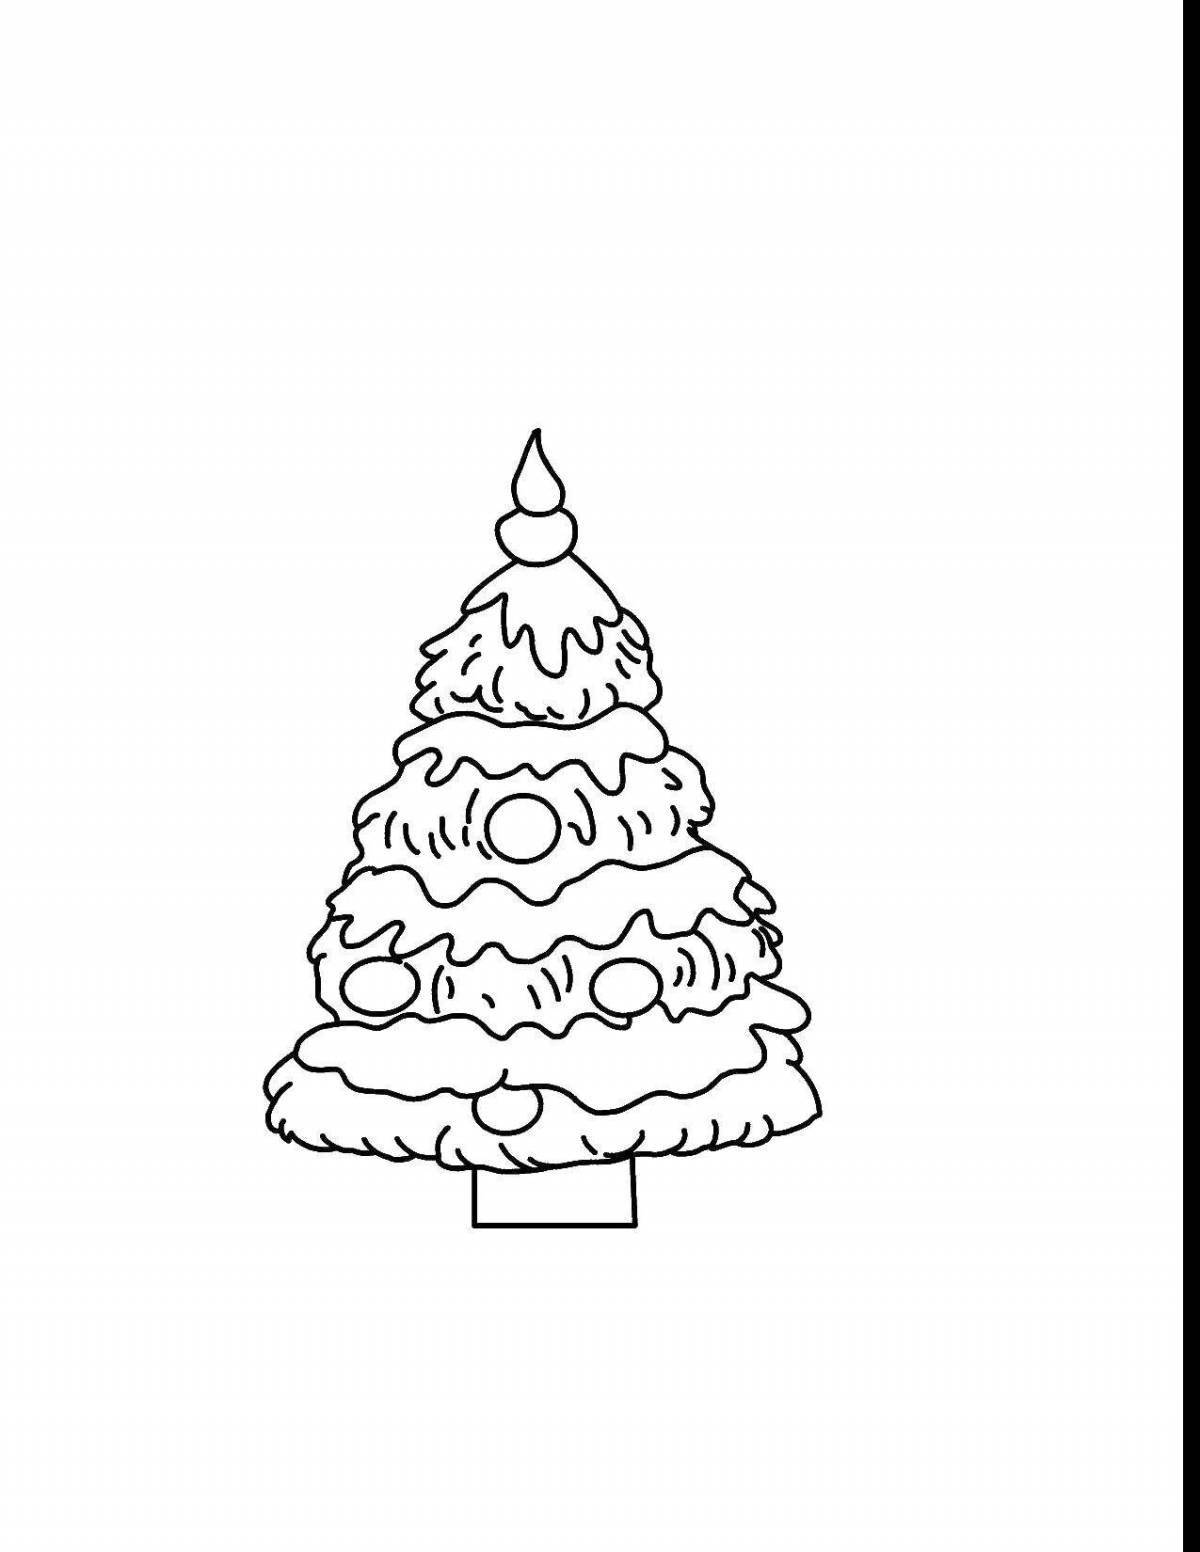 Coloring book elegant tree in the snow